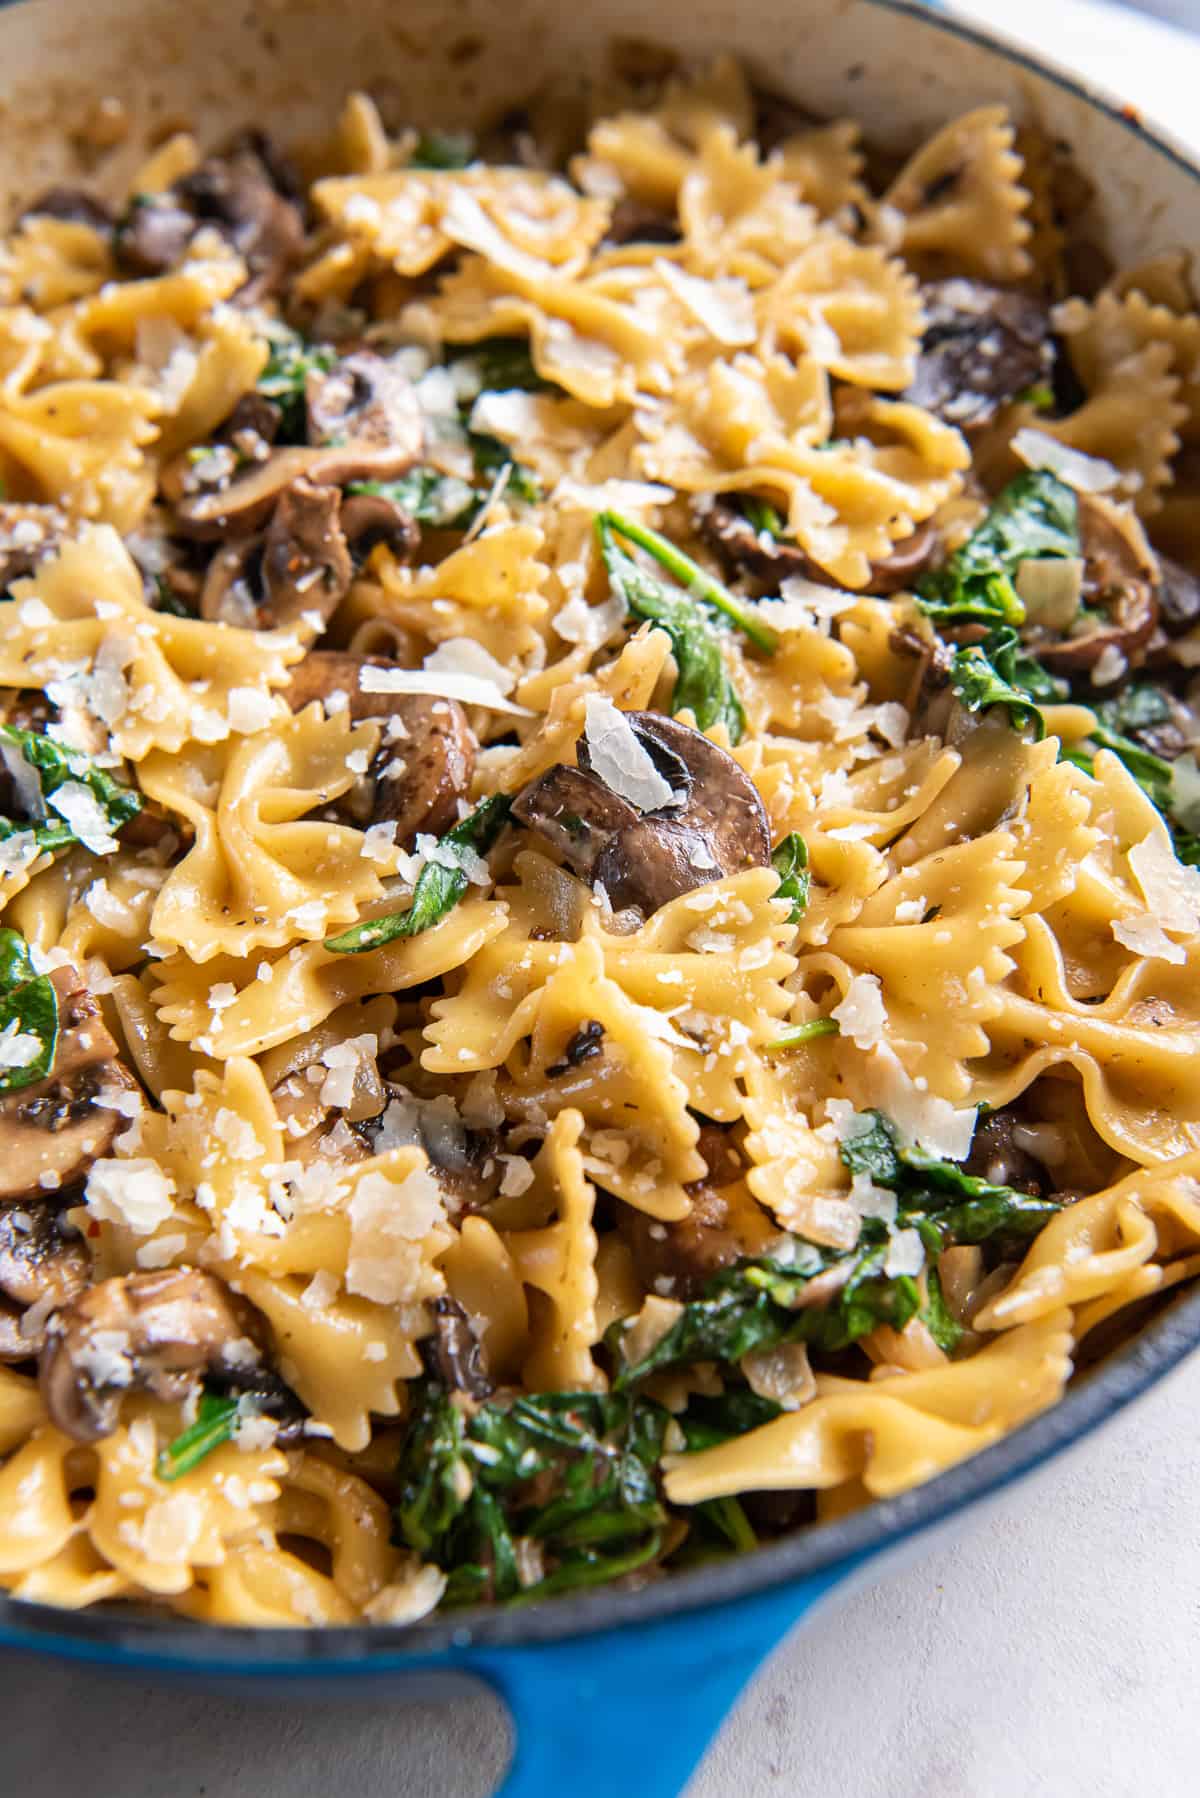 Bowtie pasta with mushrooms and spinach in a blue skillet.